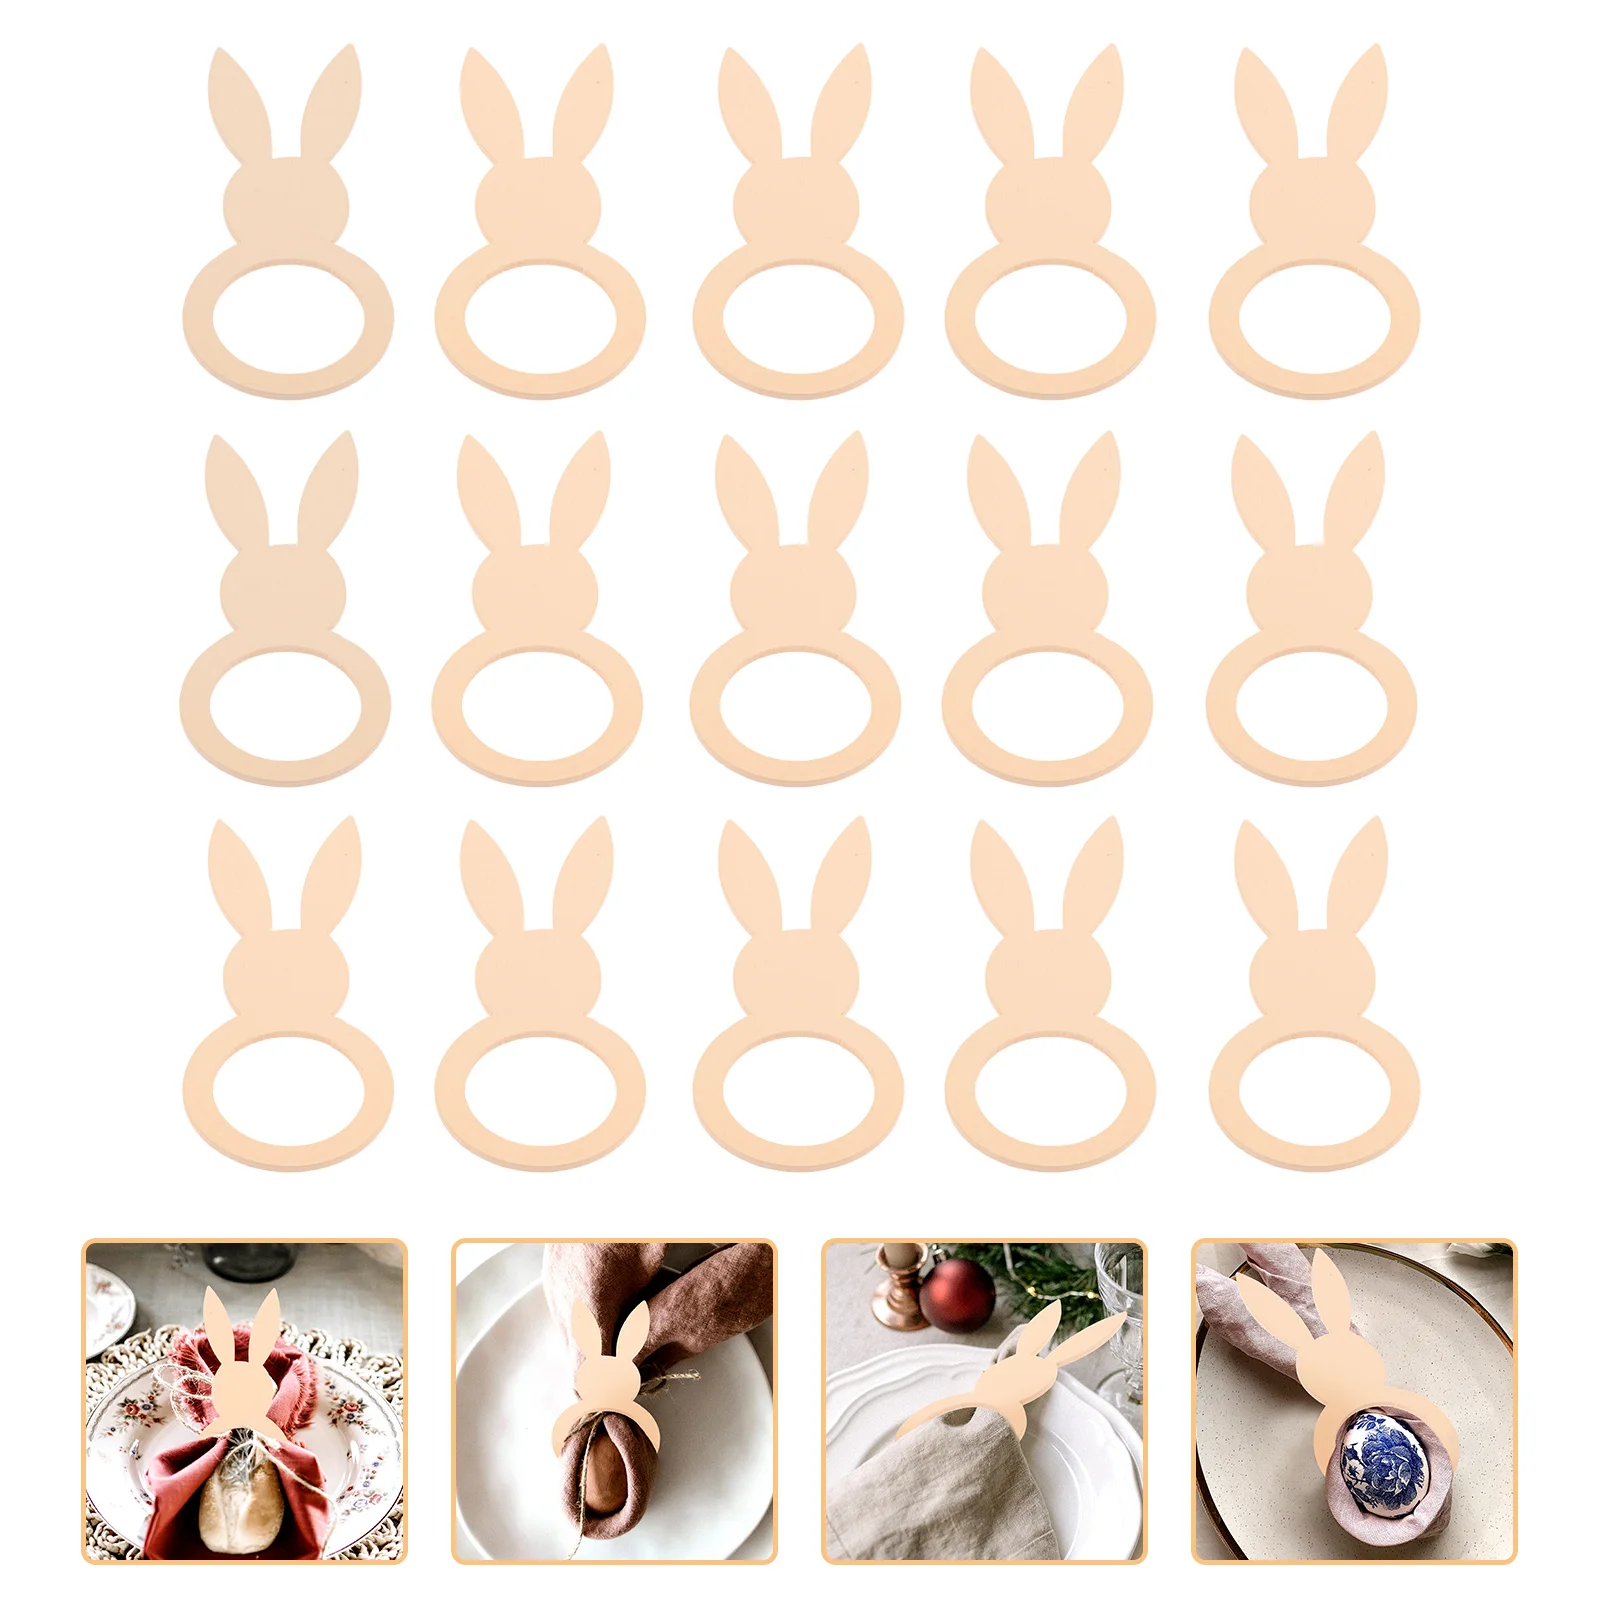 

Napkin Easter Rings Ring Buckles Serviette Rabbit Bunny Party Buckle Holiday Table Decoration Wood Holder Creative Adorable Ear